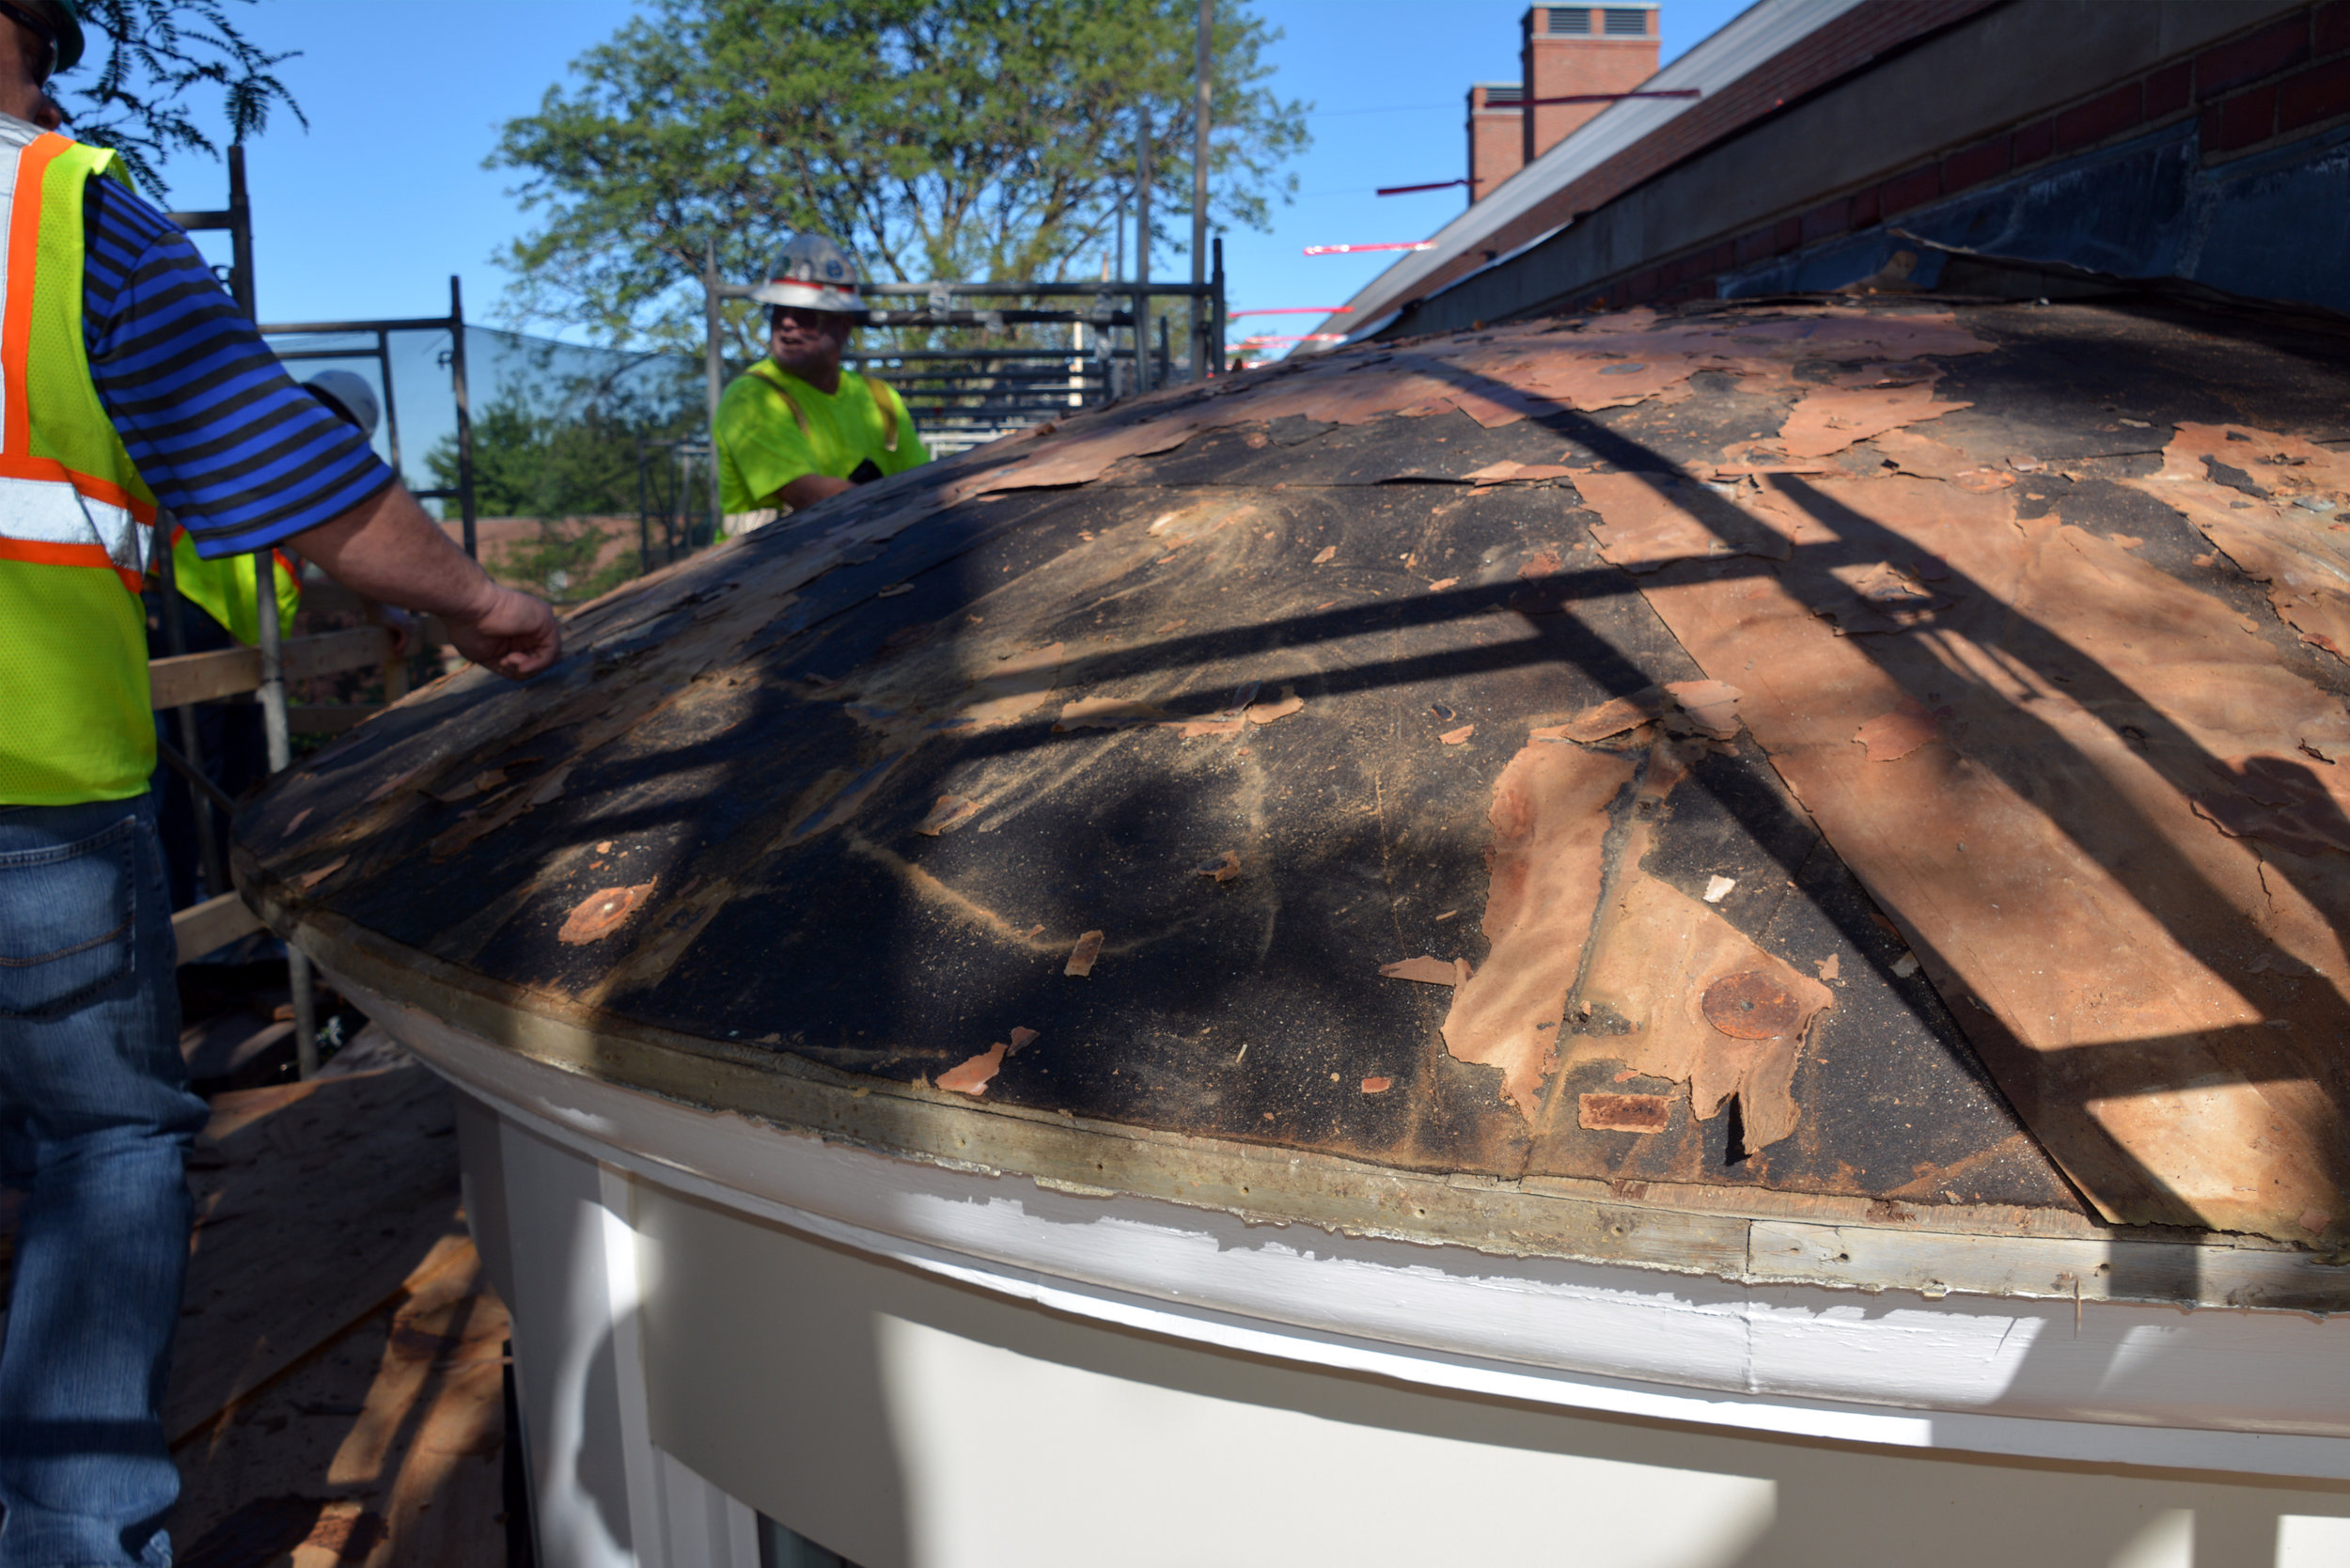  Progress: Copper Roof Replacement 